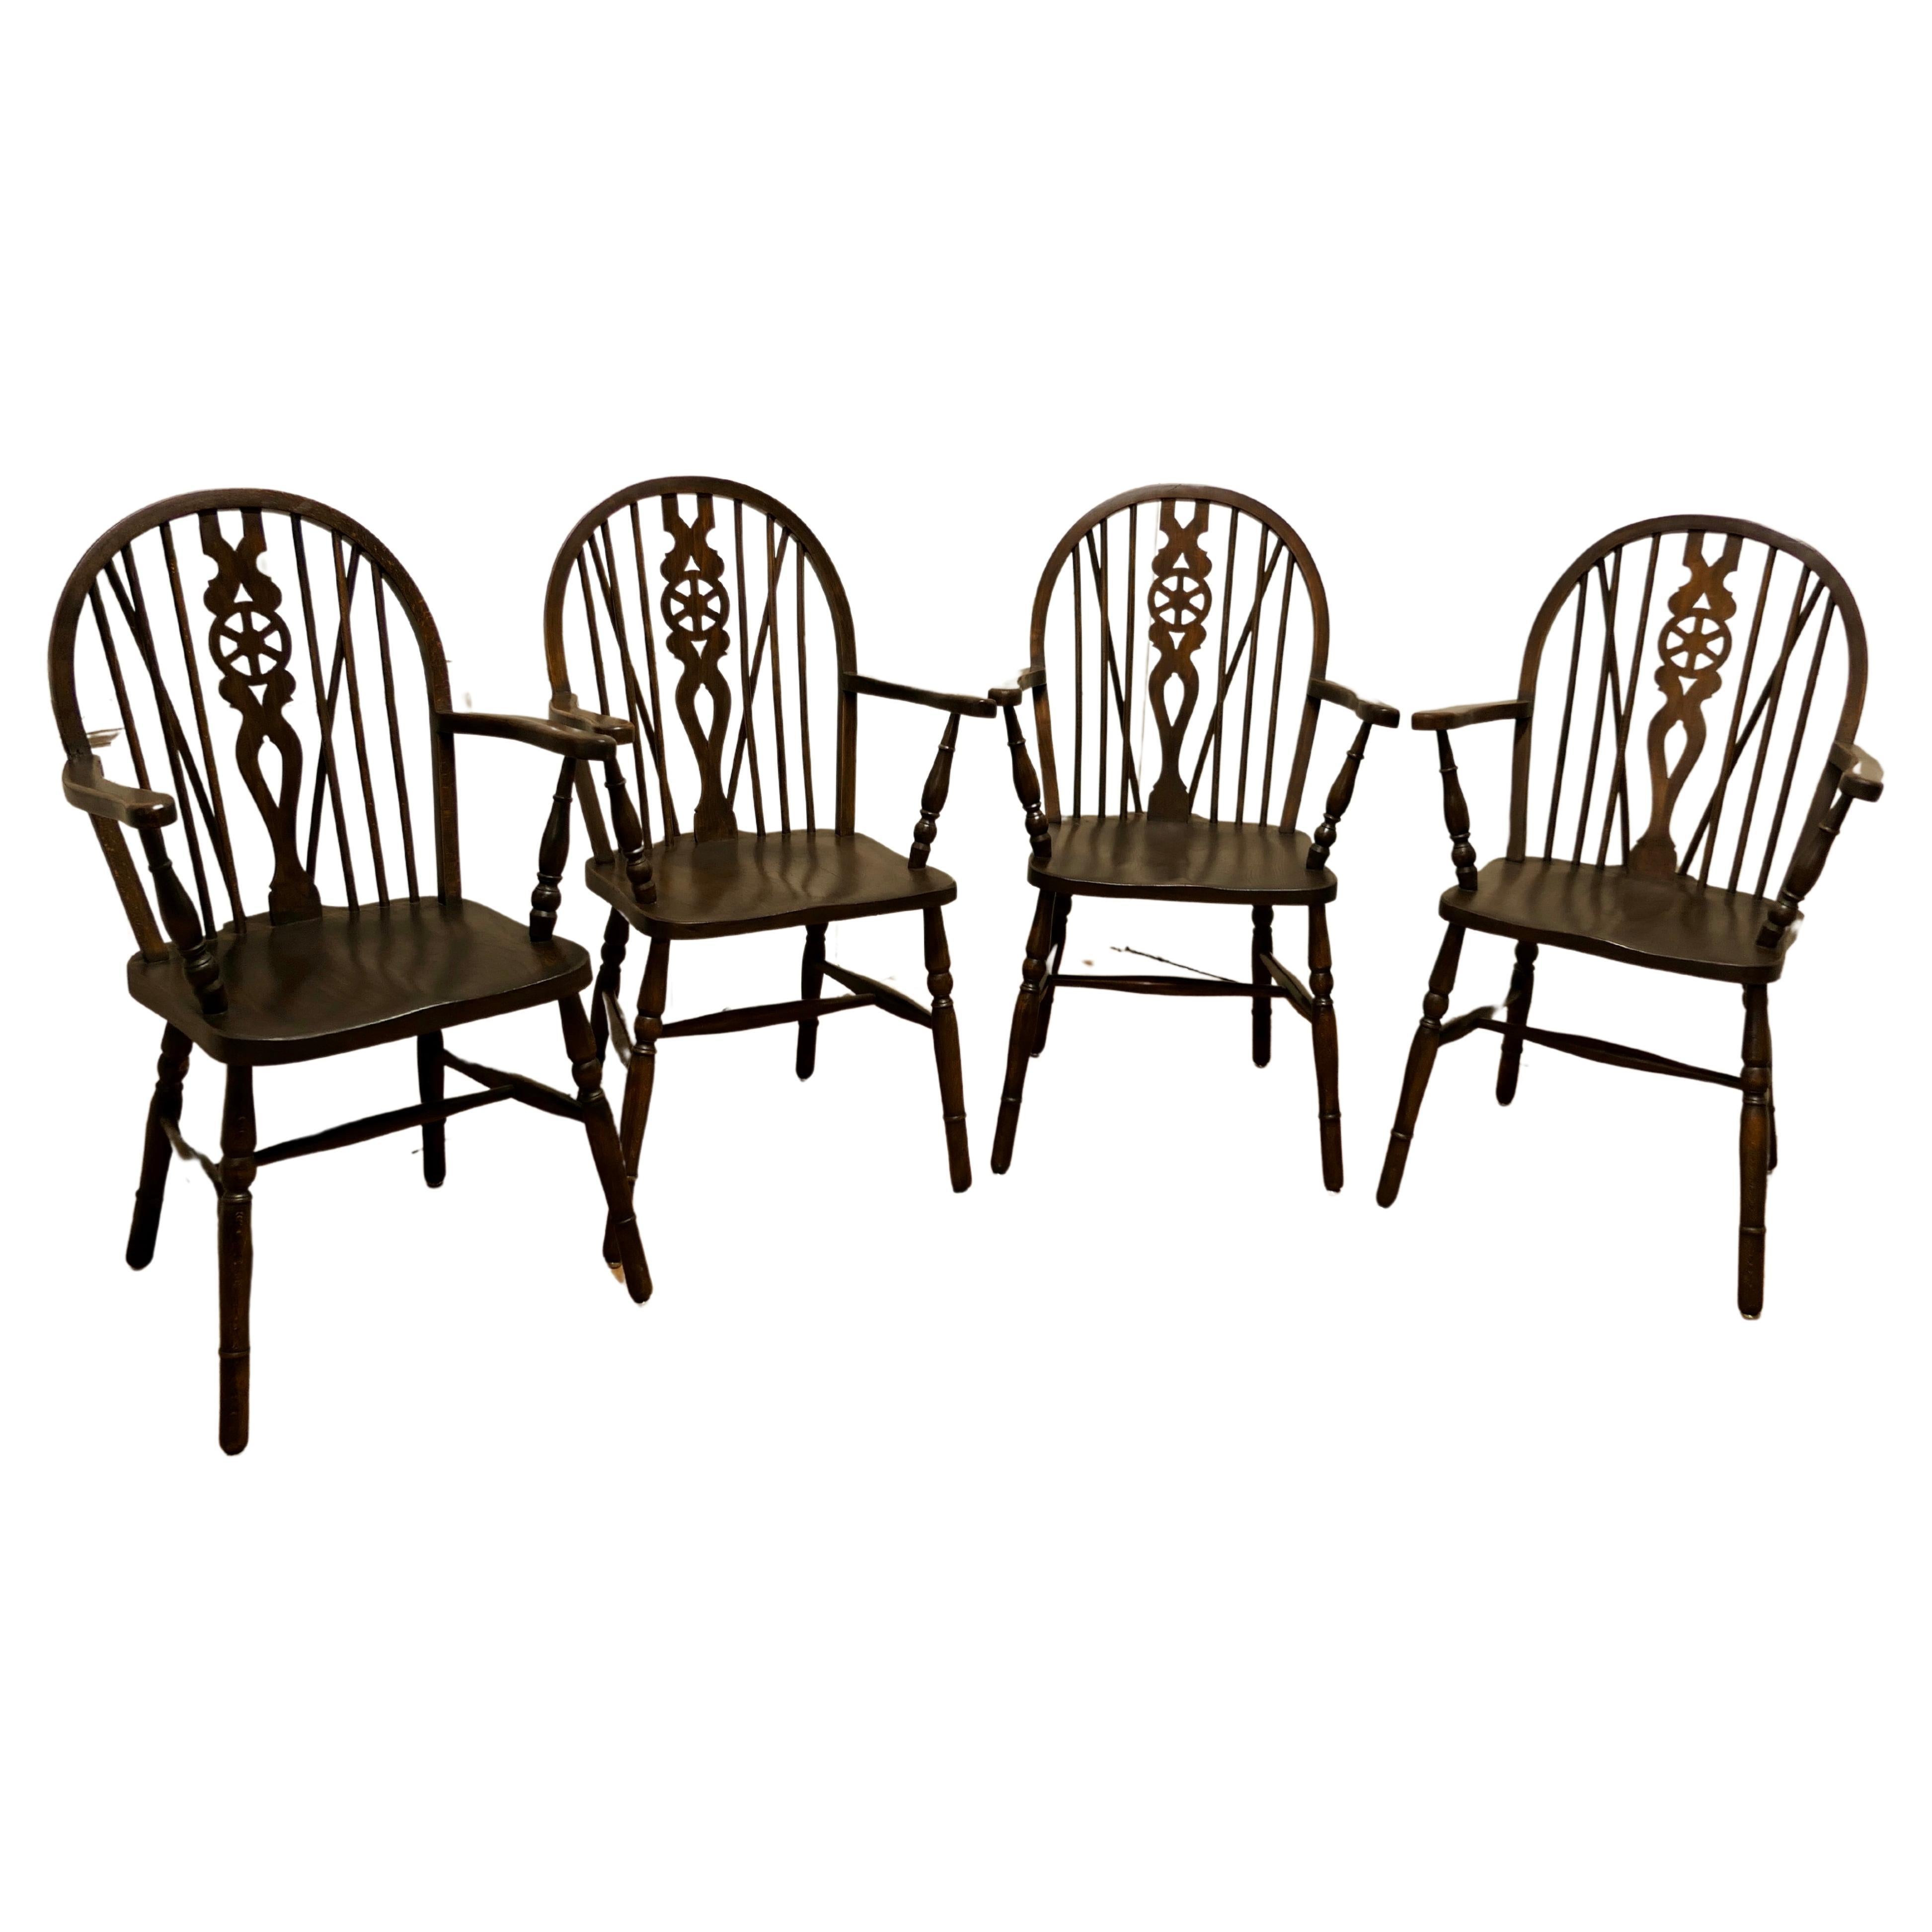 Set of 4 Beech and Elm Wheel Back Carver Chairs    